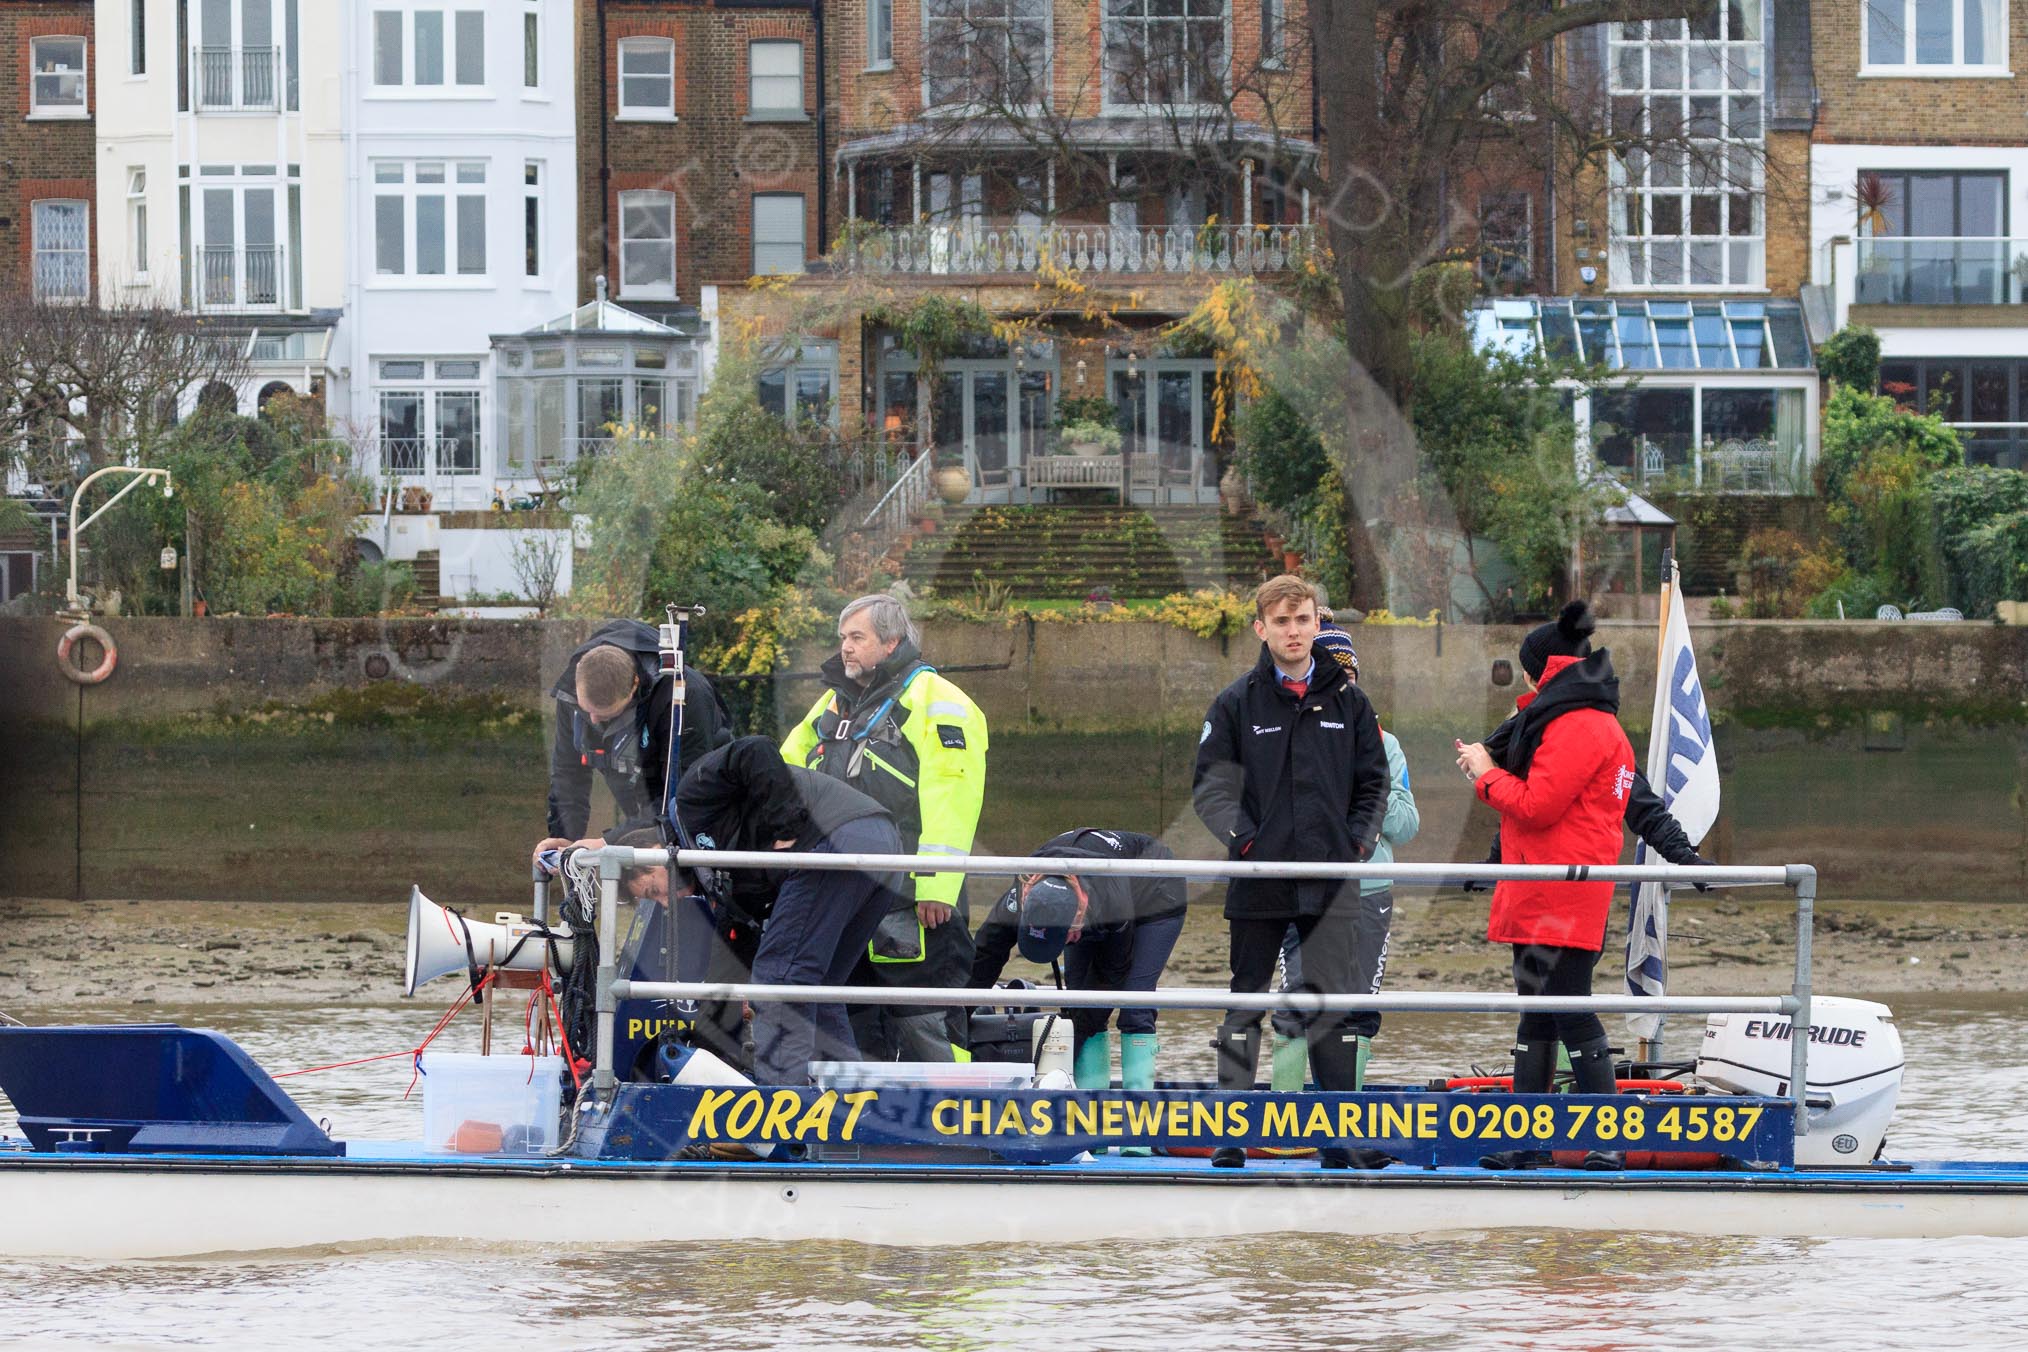 The Boat Race season 2018 - Women's Boat Race Trial Eights (CUWBC, Cambridge): The boat of race umpire Sir Matthew Pinsent.
River Thames between Putney Bridge and Mortlake,
London SW15,

United Kingdom,
on 05 December 2017 at 12:30, image #32